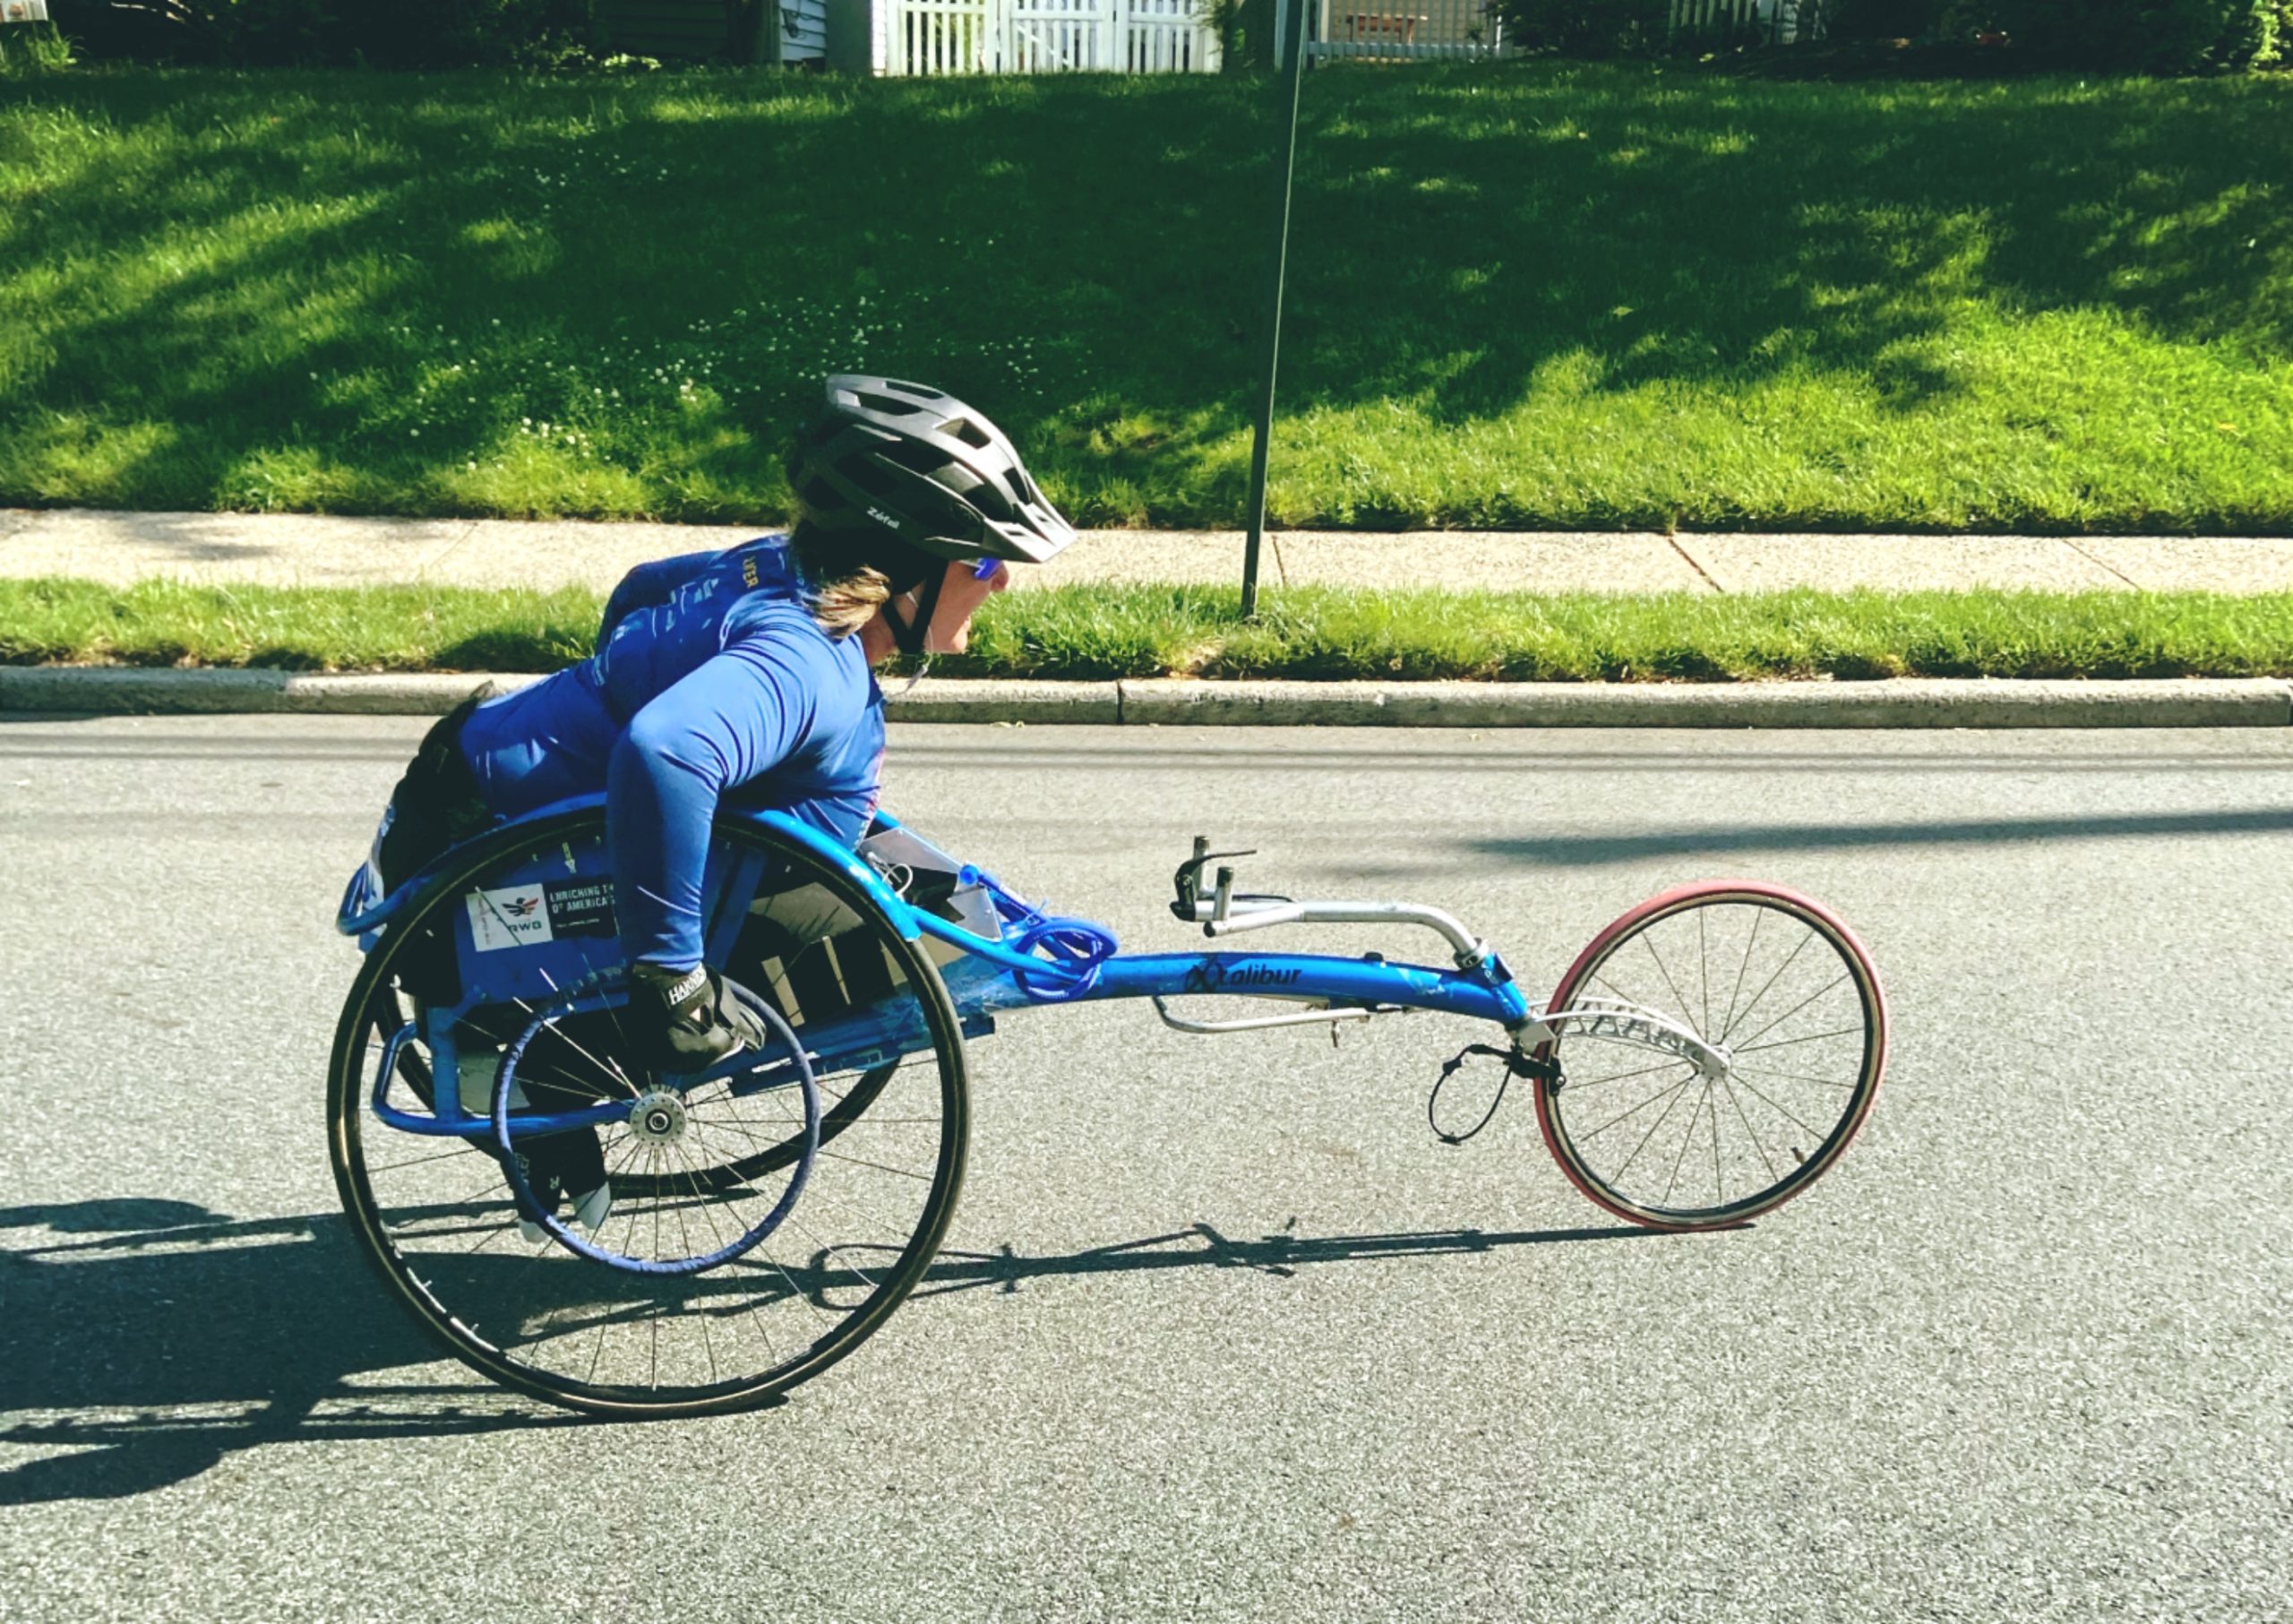 Elite age group wheelchair racer Sandy Dailey shows us that true strength comes from within.